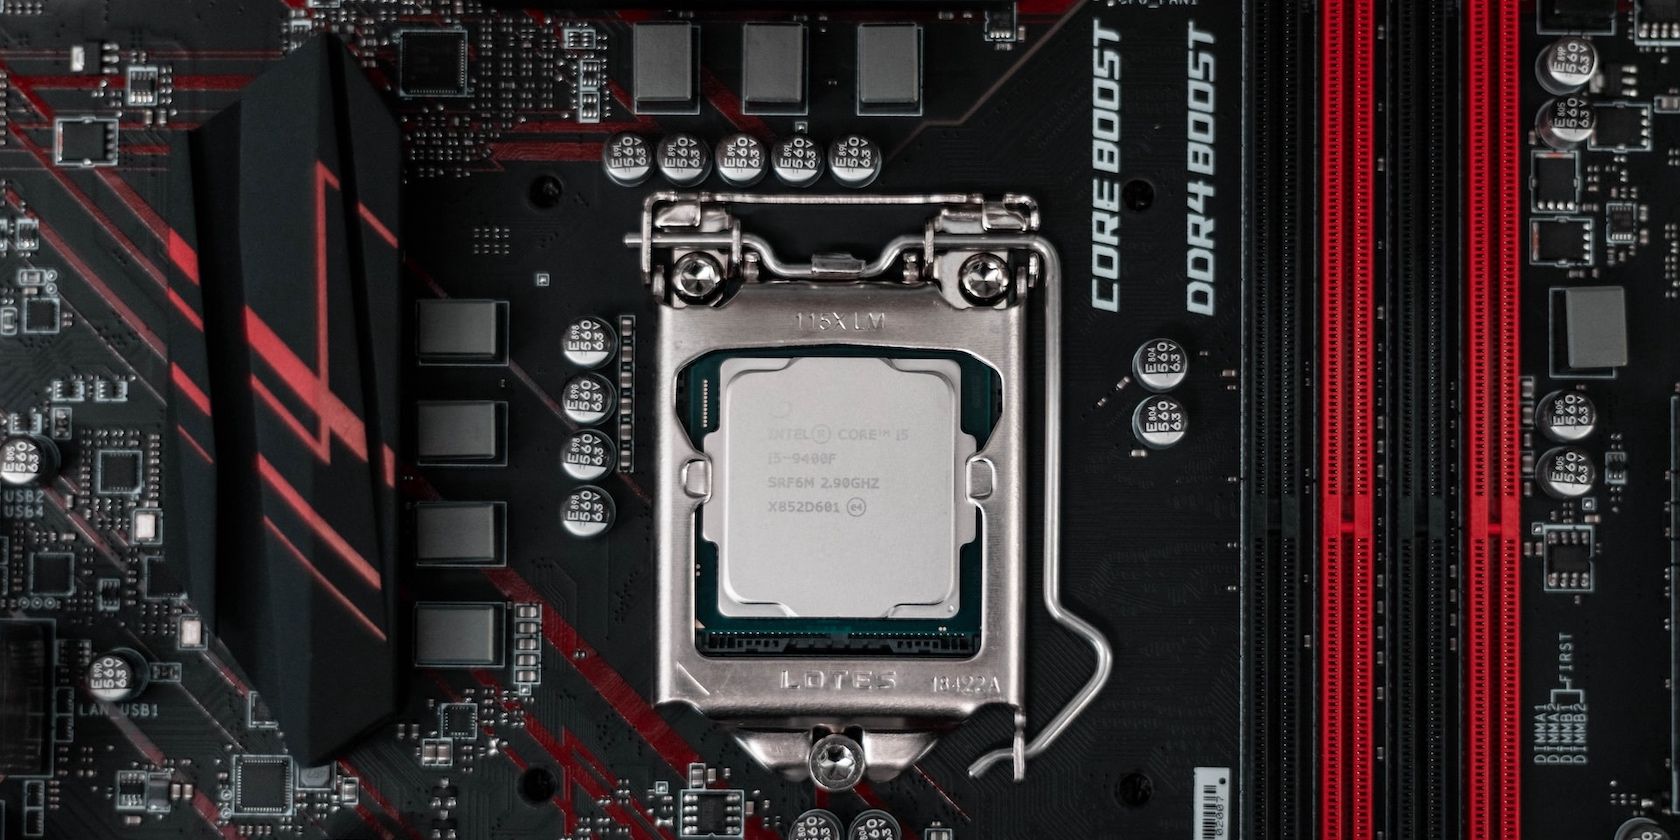 An Intel CPU on a motherboard